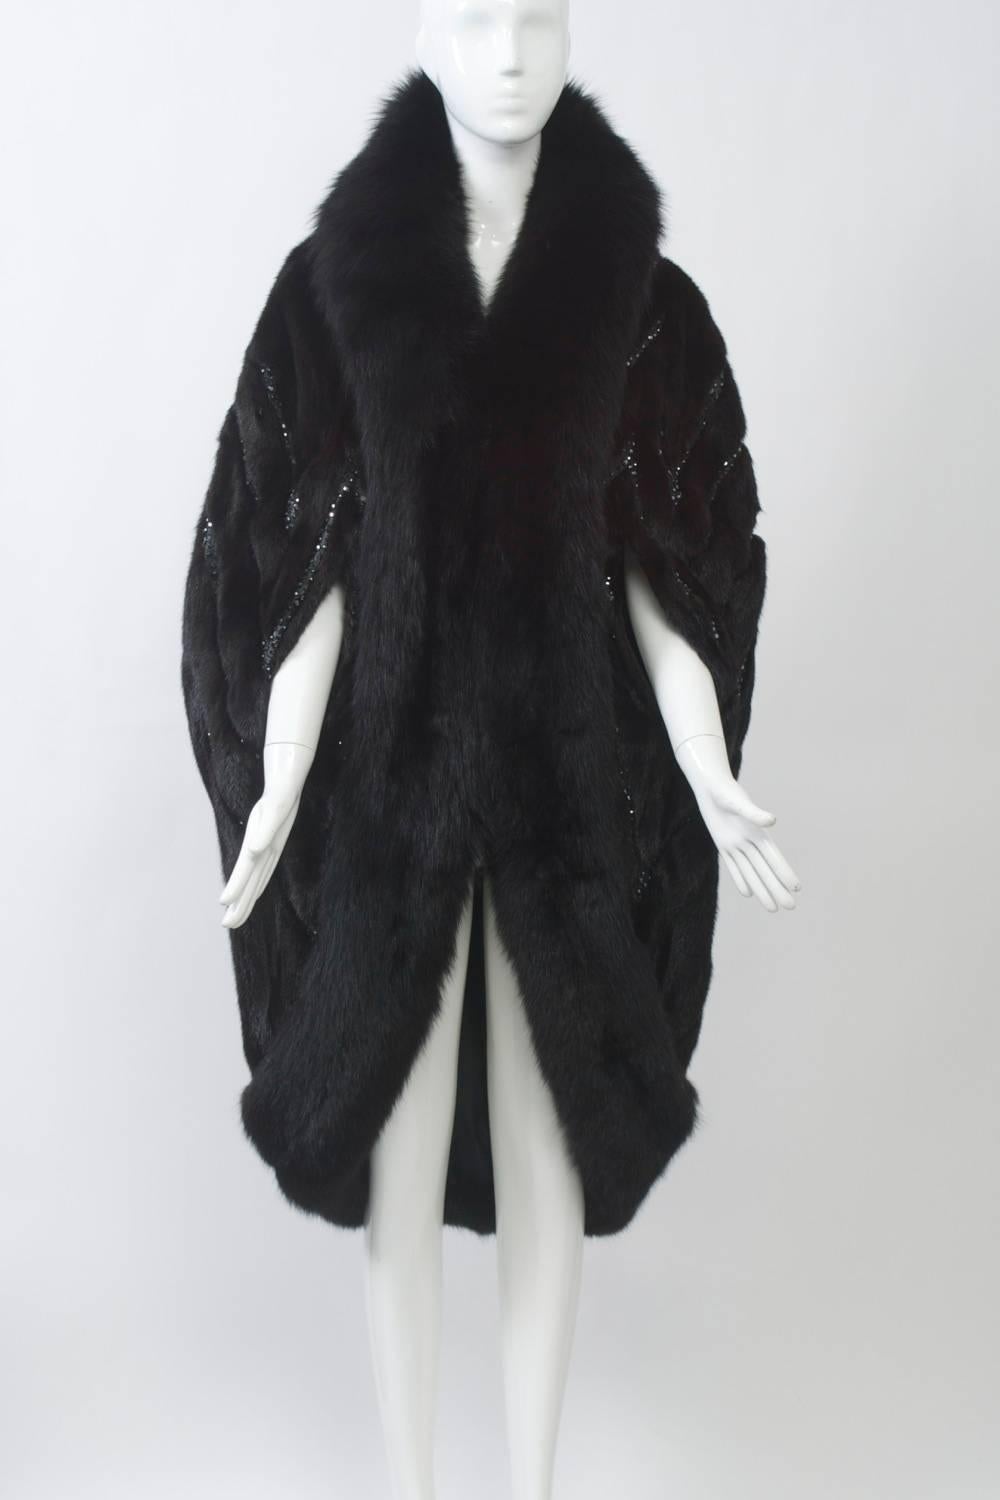 Spectacular fur cocoon cape by Bob Mackie in dark ranch mink trimmed in brown fox. The herringbone-patterned mink features black leather between the mink strips, which is studded with iridescent bezel-set rhinestones. This is a unique, star-quality